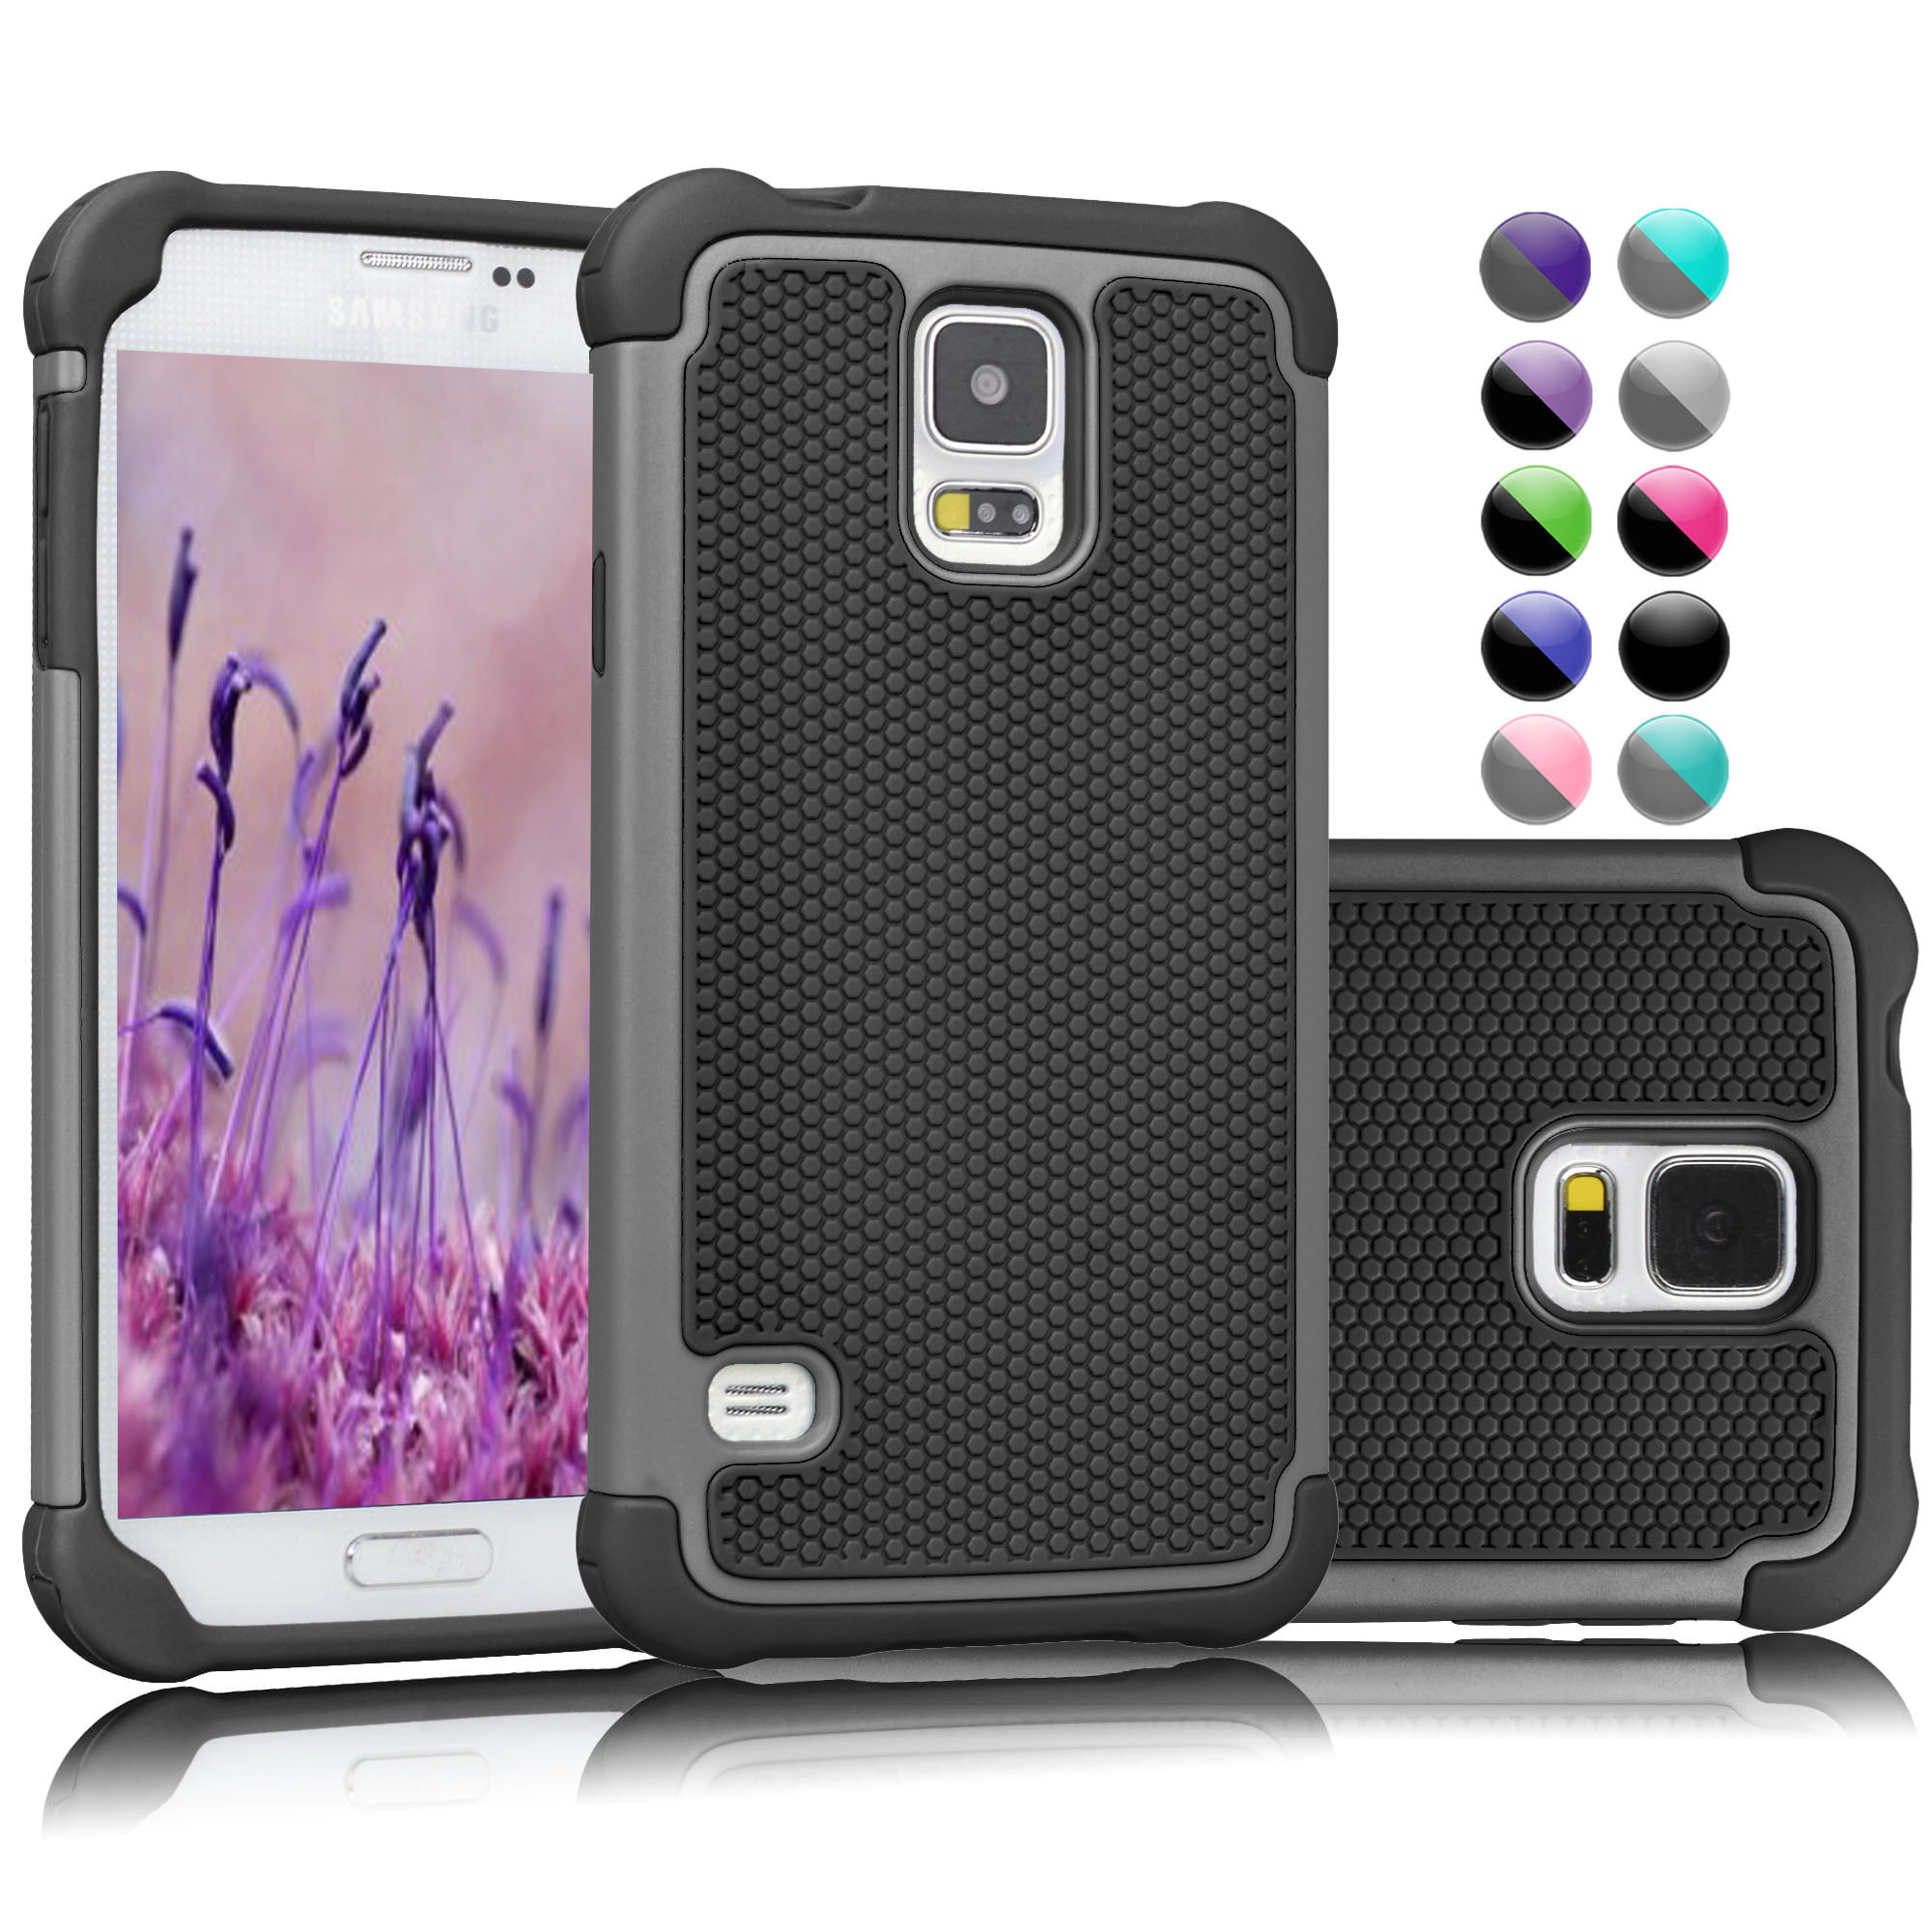 Ass Uitrusting bedelaar Galaxy S5 Case, Galaxy S5 Sturdy Case, Njjex [Gray] Rugged Rubber Shock  Absorbing Plastic Hard Protective Case For Samsung Galaxy S5 S V I9600 GS5  All Carriers - Walmart.com